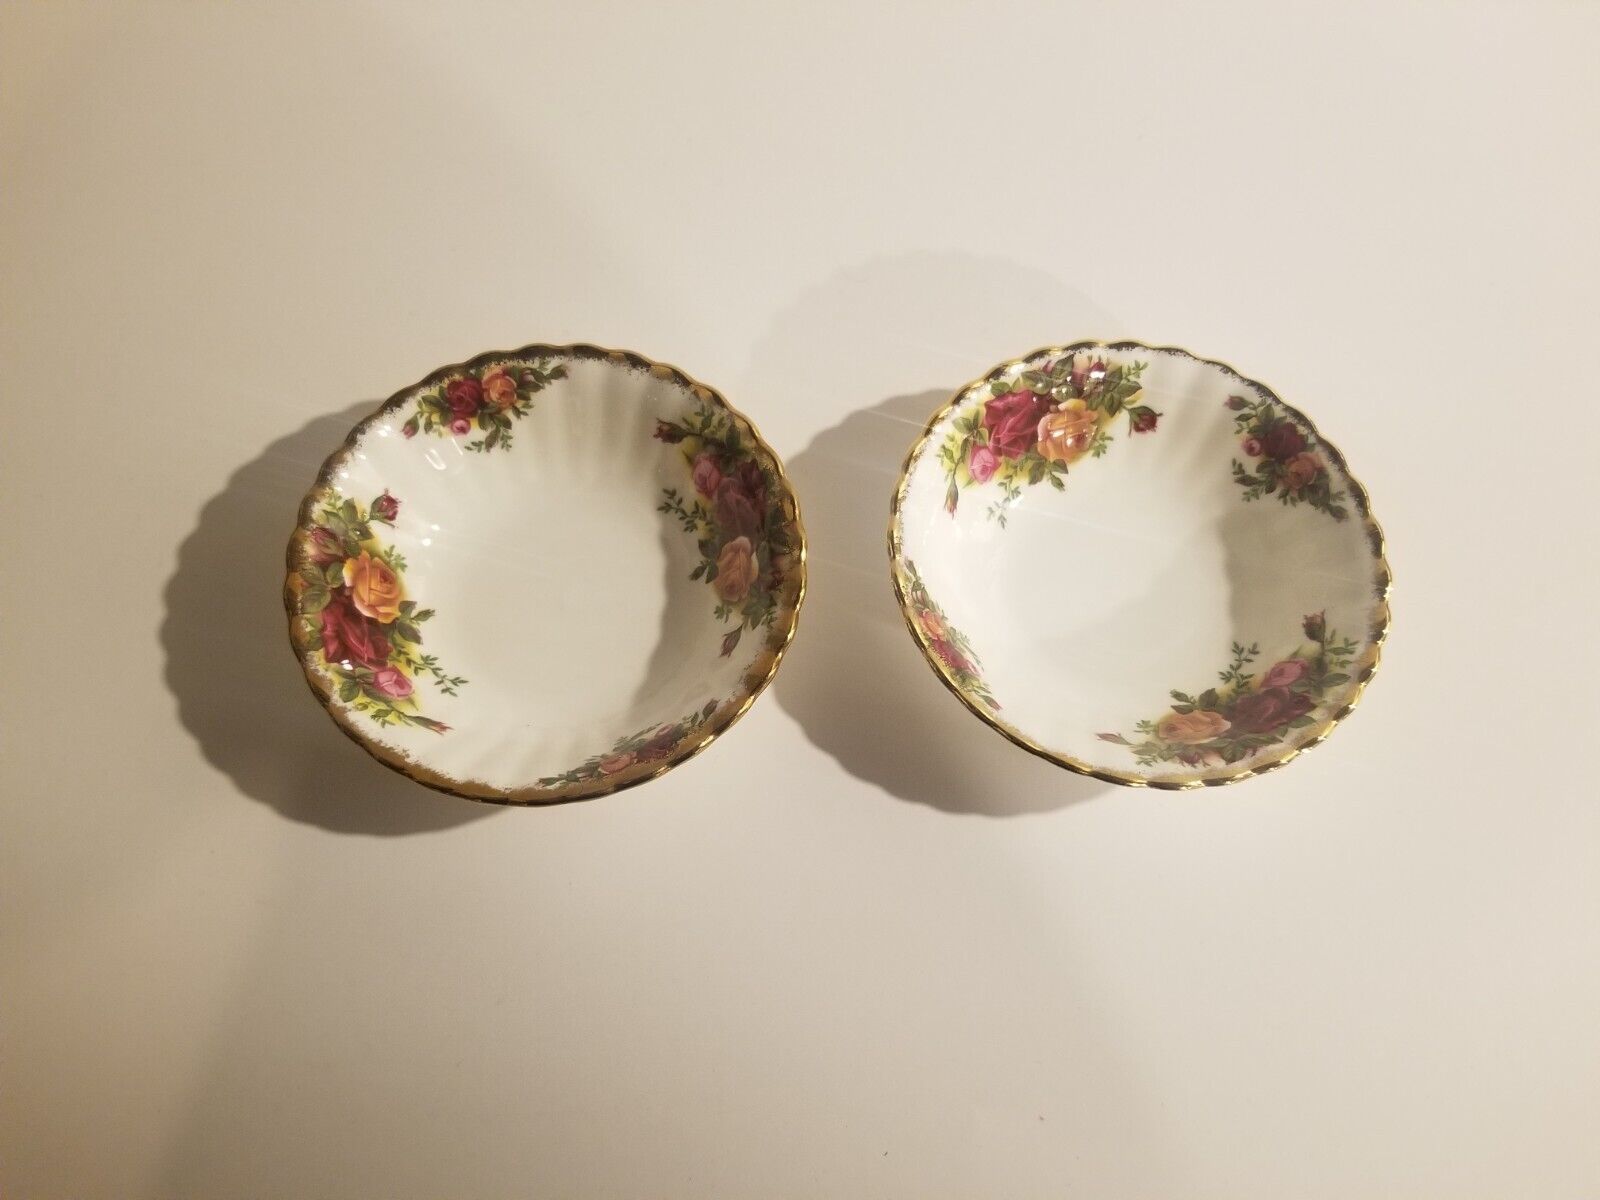 Primary image for Royal Albert Old Country Roses Fruit Bowls (2) 5 1/4 inch England Bone China